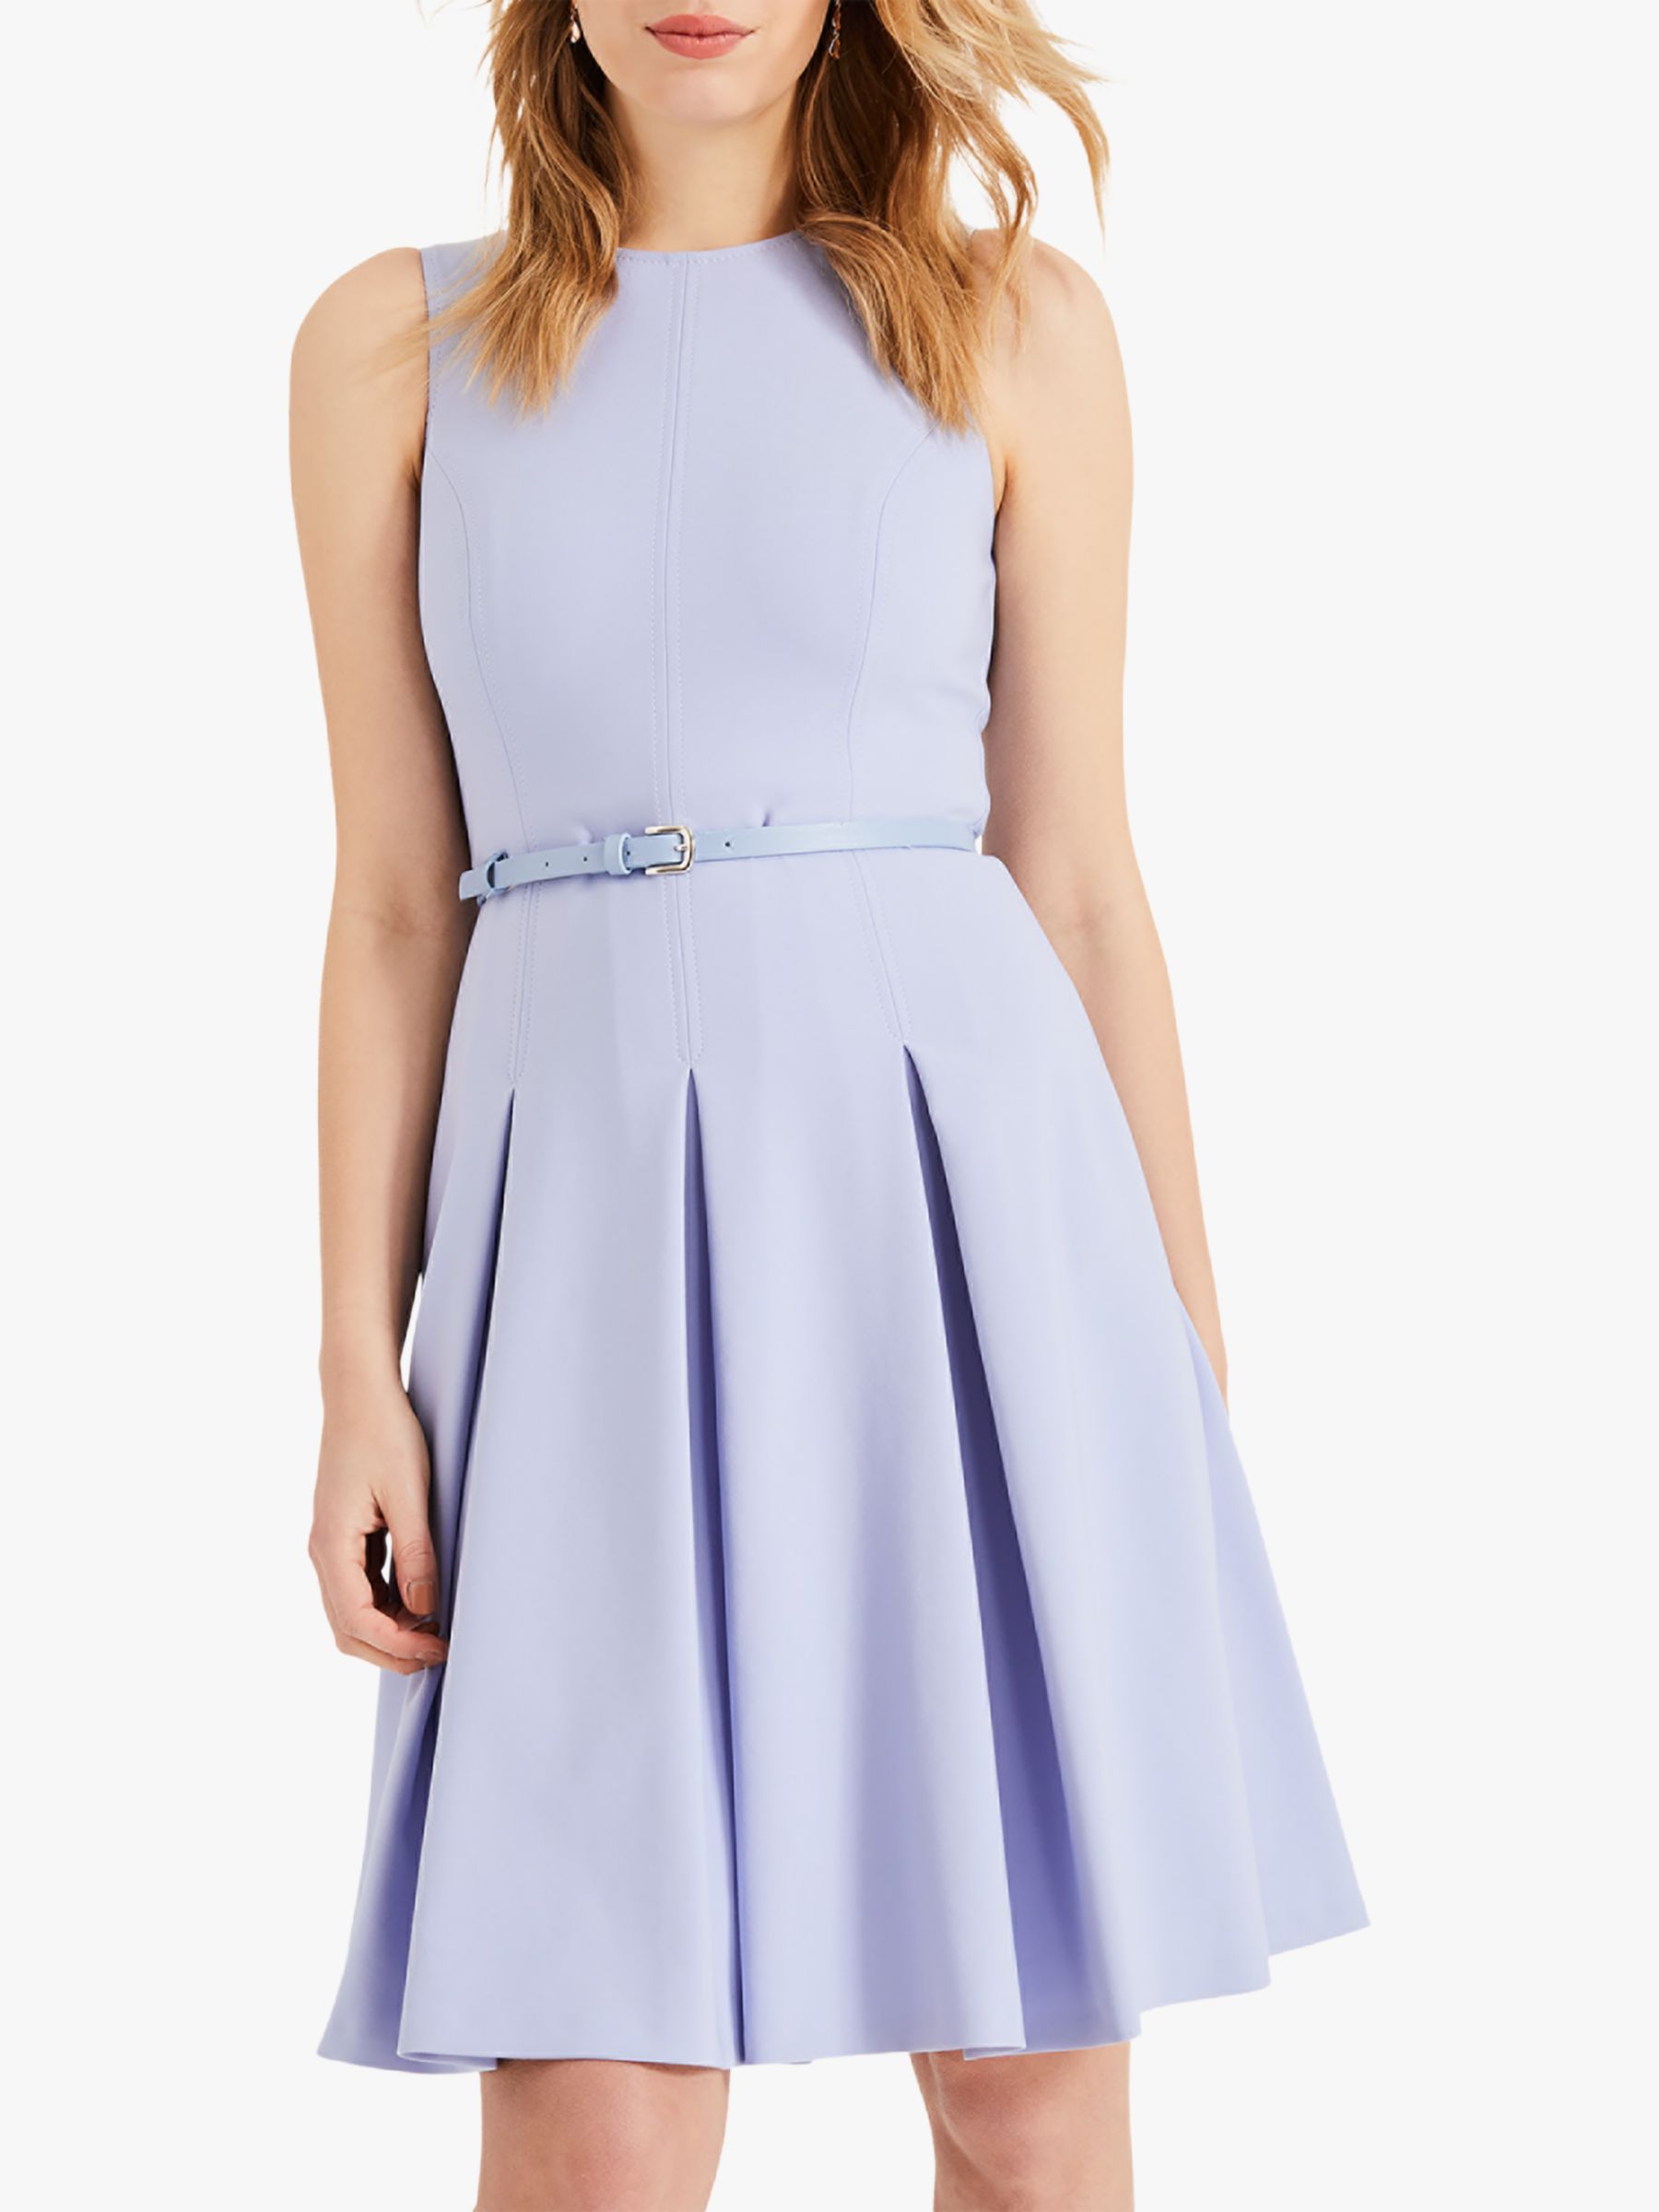 Phase Eight Elidah Belted Pleat Dress, Dusty Blue at John Lewis & Partners